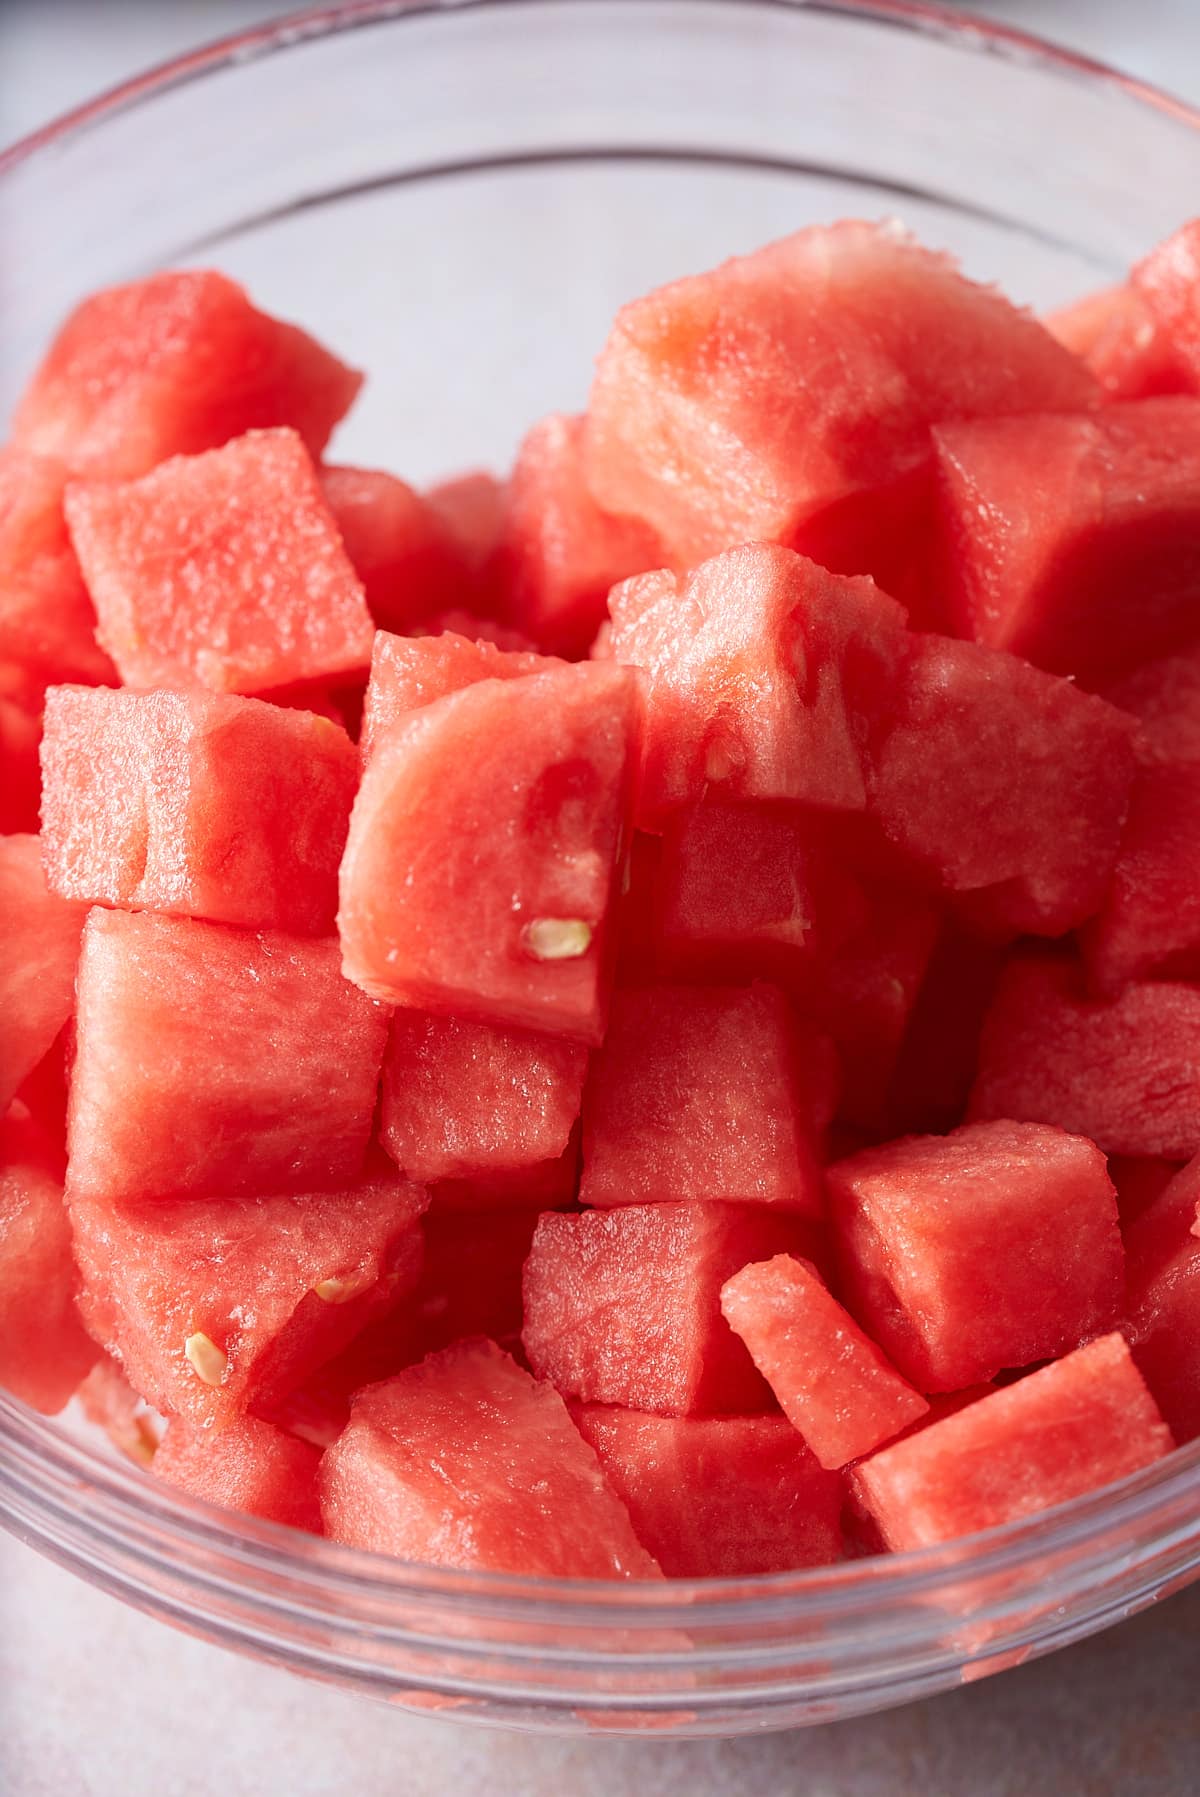 A glass bowl filled with diced watermelon.